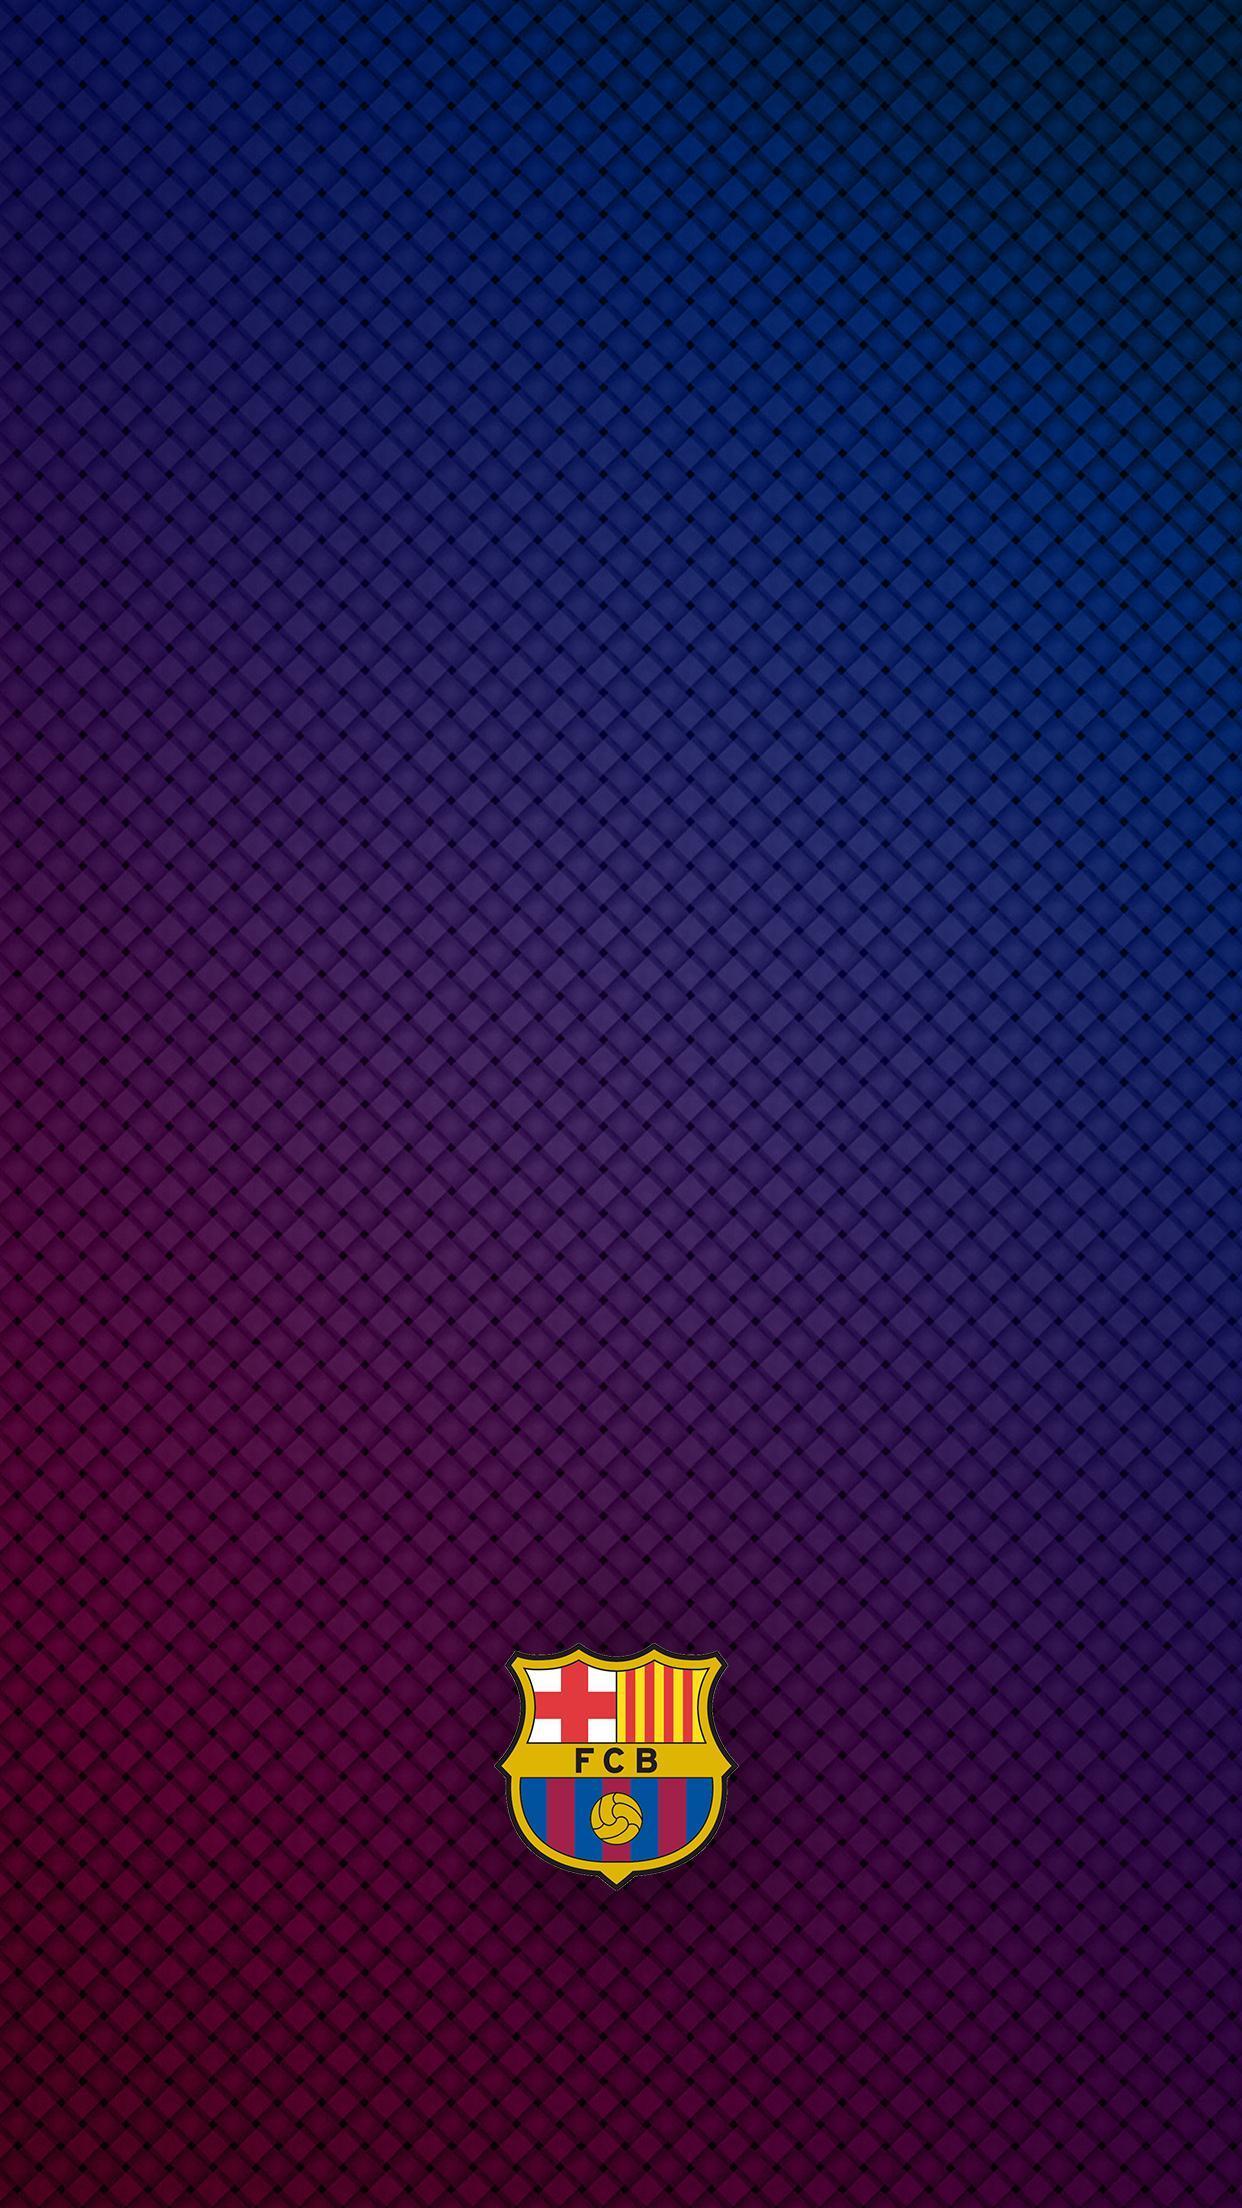 Fc Barcelona Phone Wallpapers Top Free Fc Barcelona Phone Backgrounds Wallpaperaccess